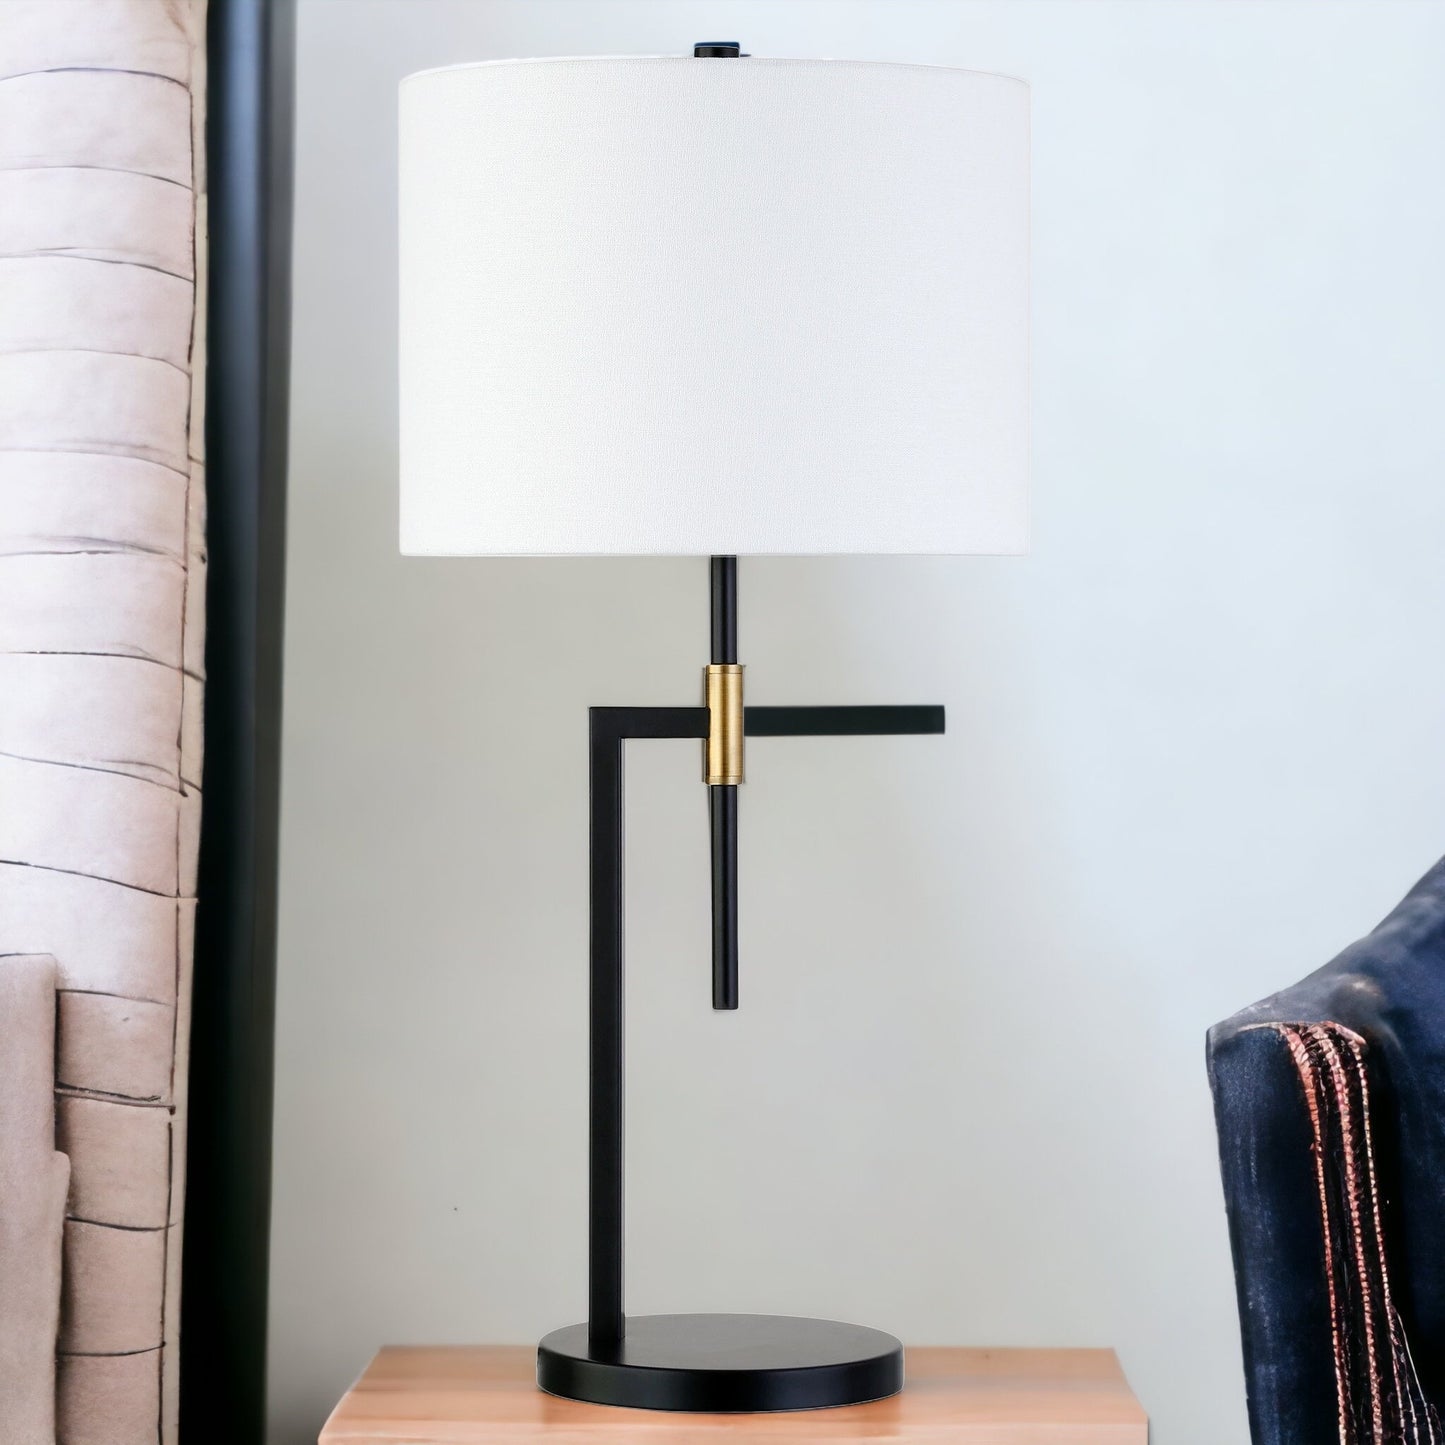 25" Black and Gold Metal Table Lamp With White Drum Shade